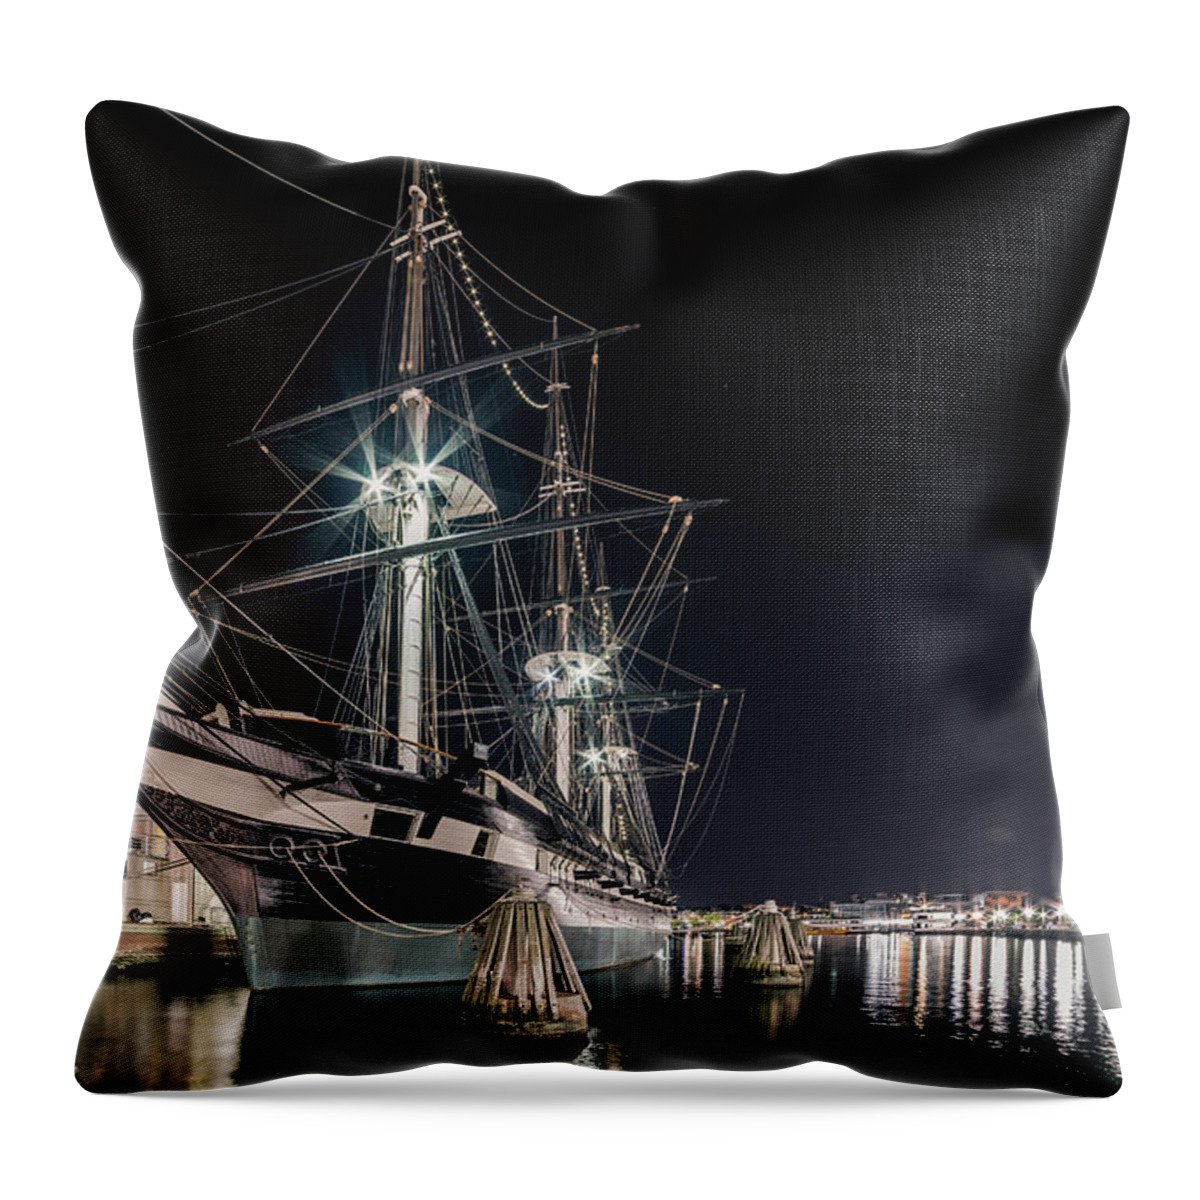 Tranquility Throw Pillow featuring the photograph Harbour by Delensmode